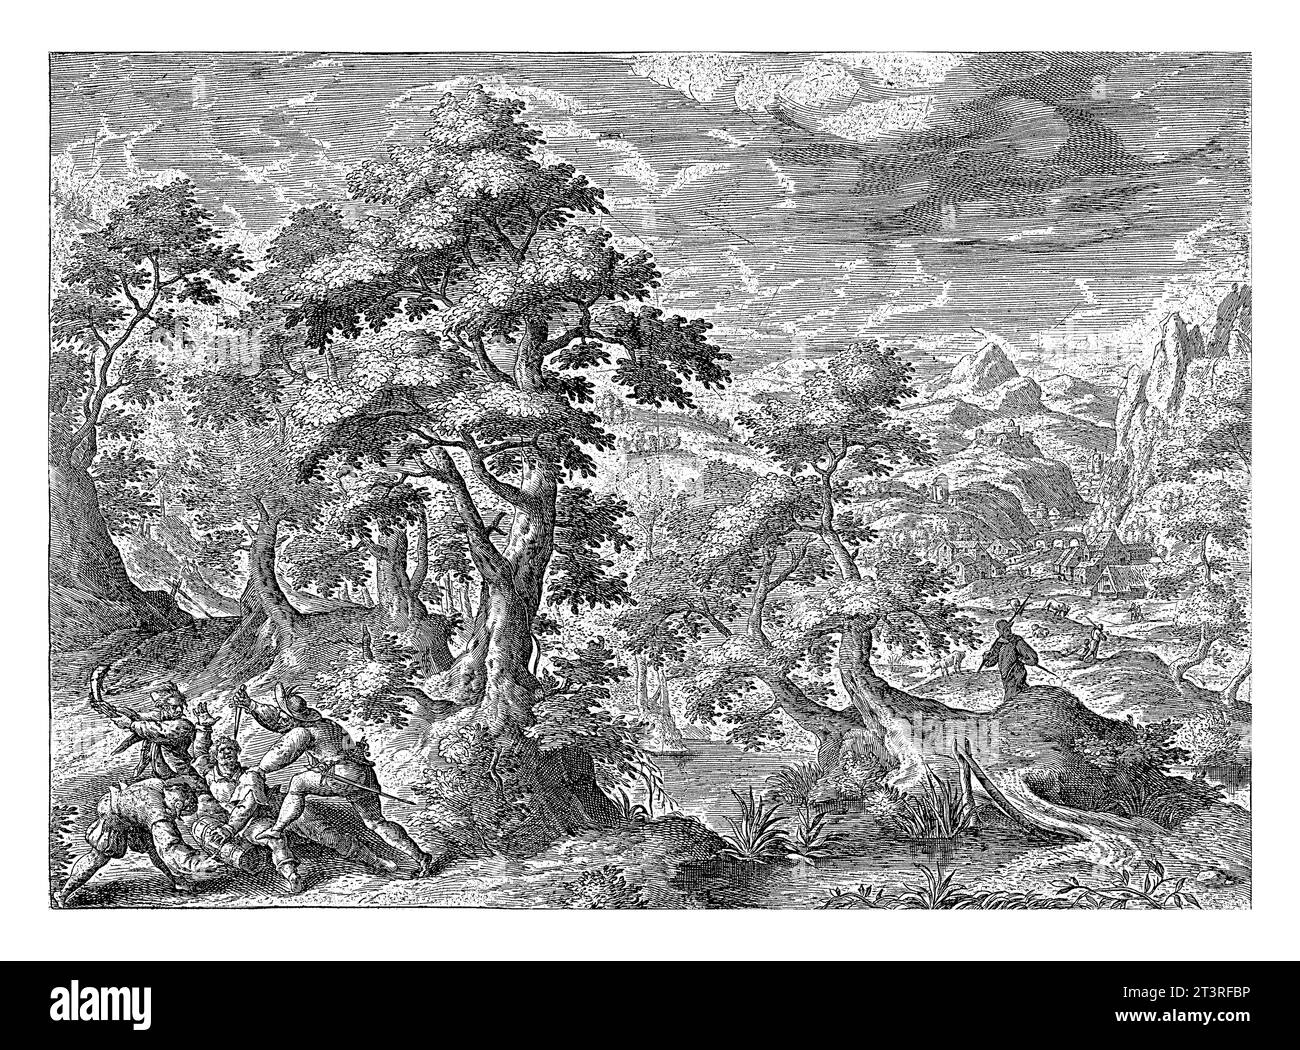 Robbery of the Traveller, Crispijn van de Passe (I), after Hans Bol, 1588 - 1589 In a forest, a traveller is attacked and stabbed by three highwaymen. Stock Photo